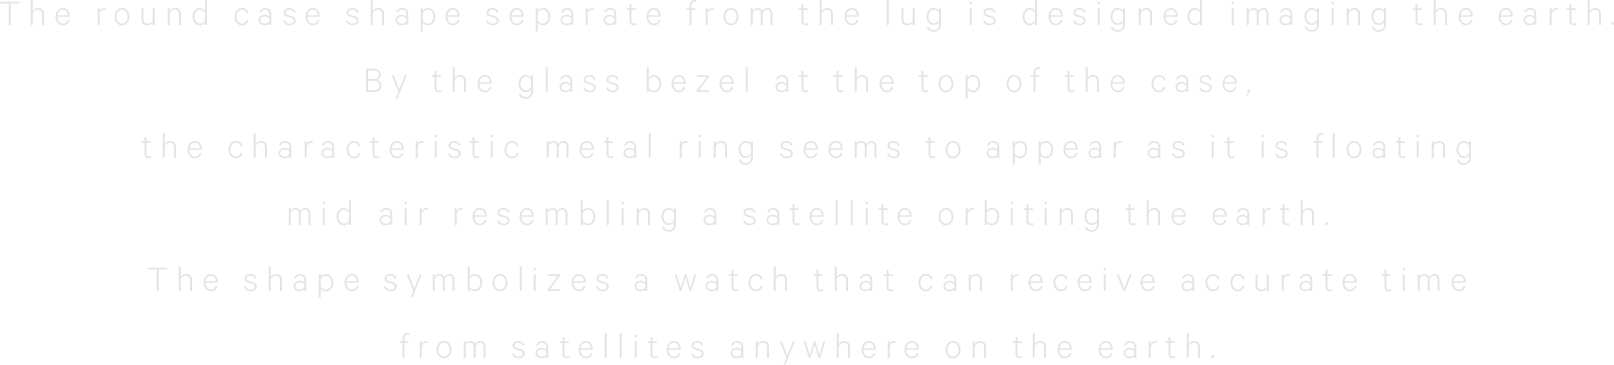 The round case shape separate fromthe lug is designed imaging the earth.By the glass bezel at thetop of the case,the characteristic metal ringseems to appear as it is floatingmid air resemblinga satellite orbiting the earth.The shape symbolizesa watch that can receive accuratetime from satellitesanywhere on the earth.